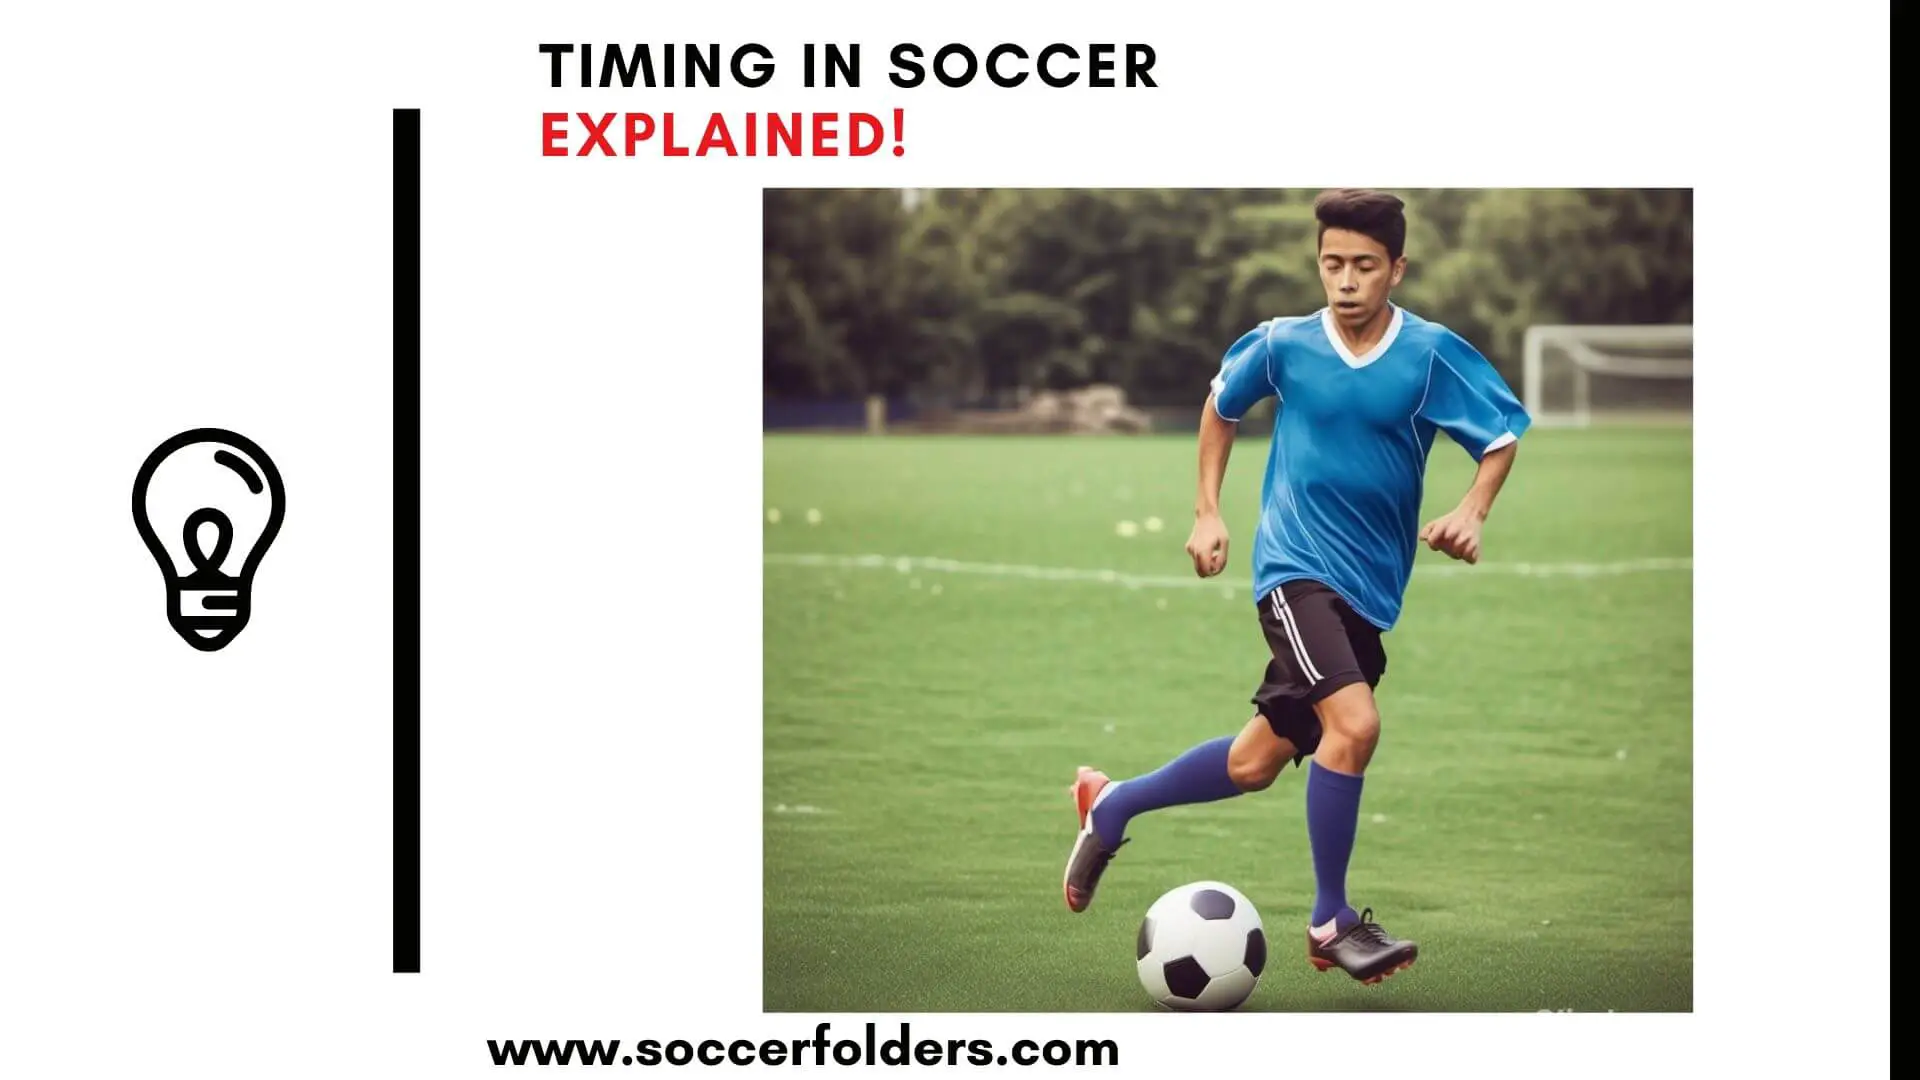 Timing in soccer - Featured image